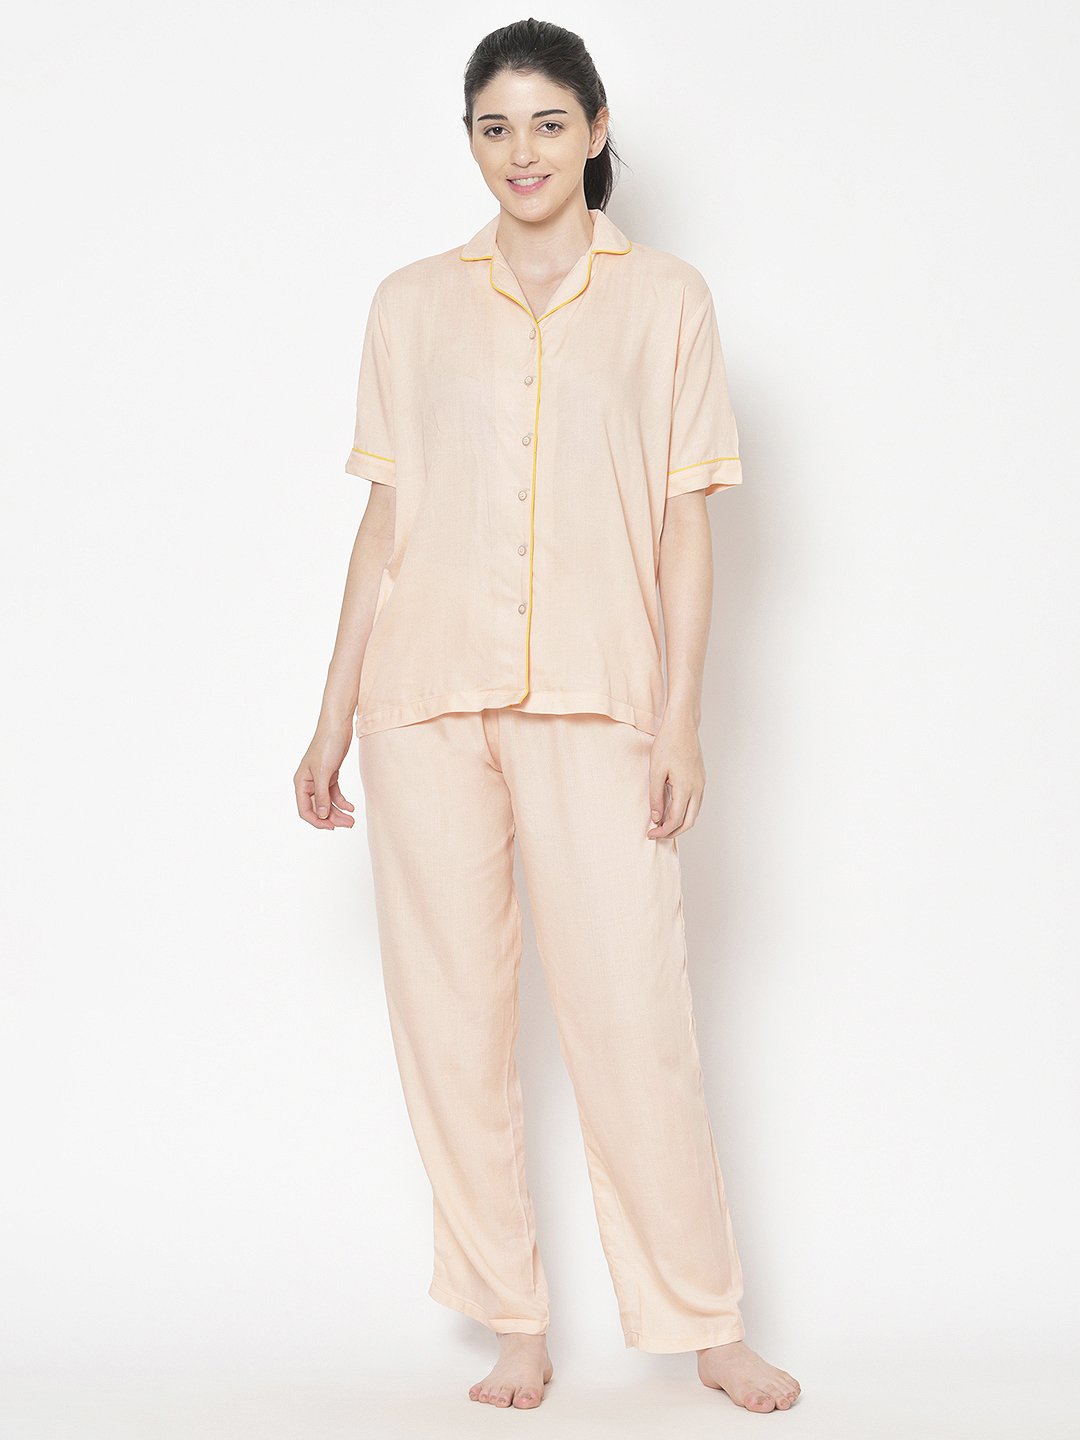 Cation Peach Solid Night Suit